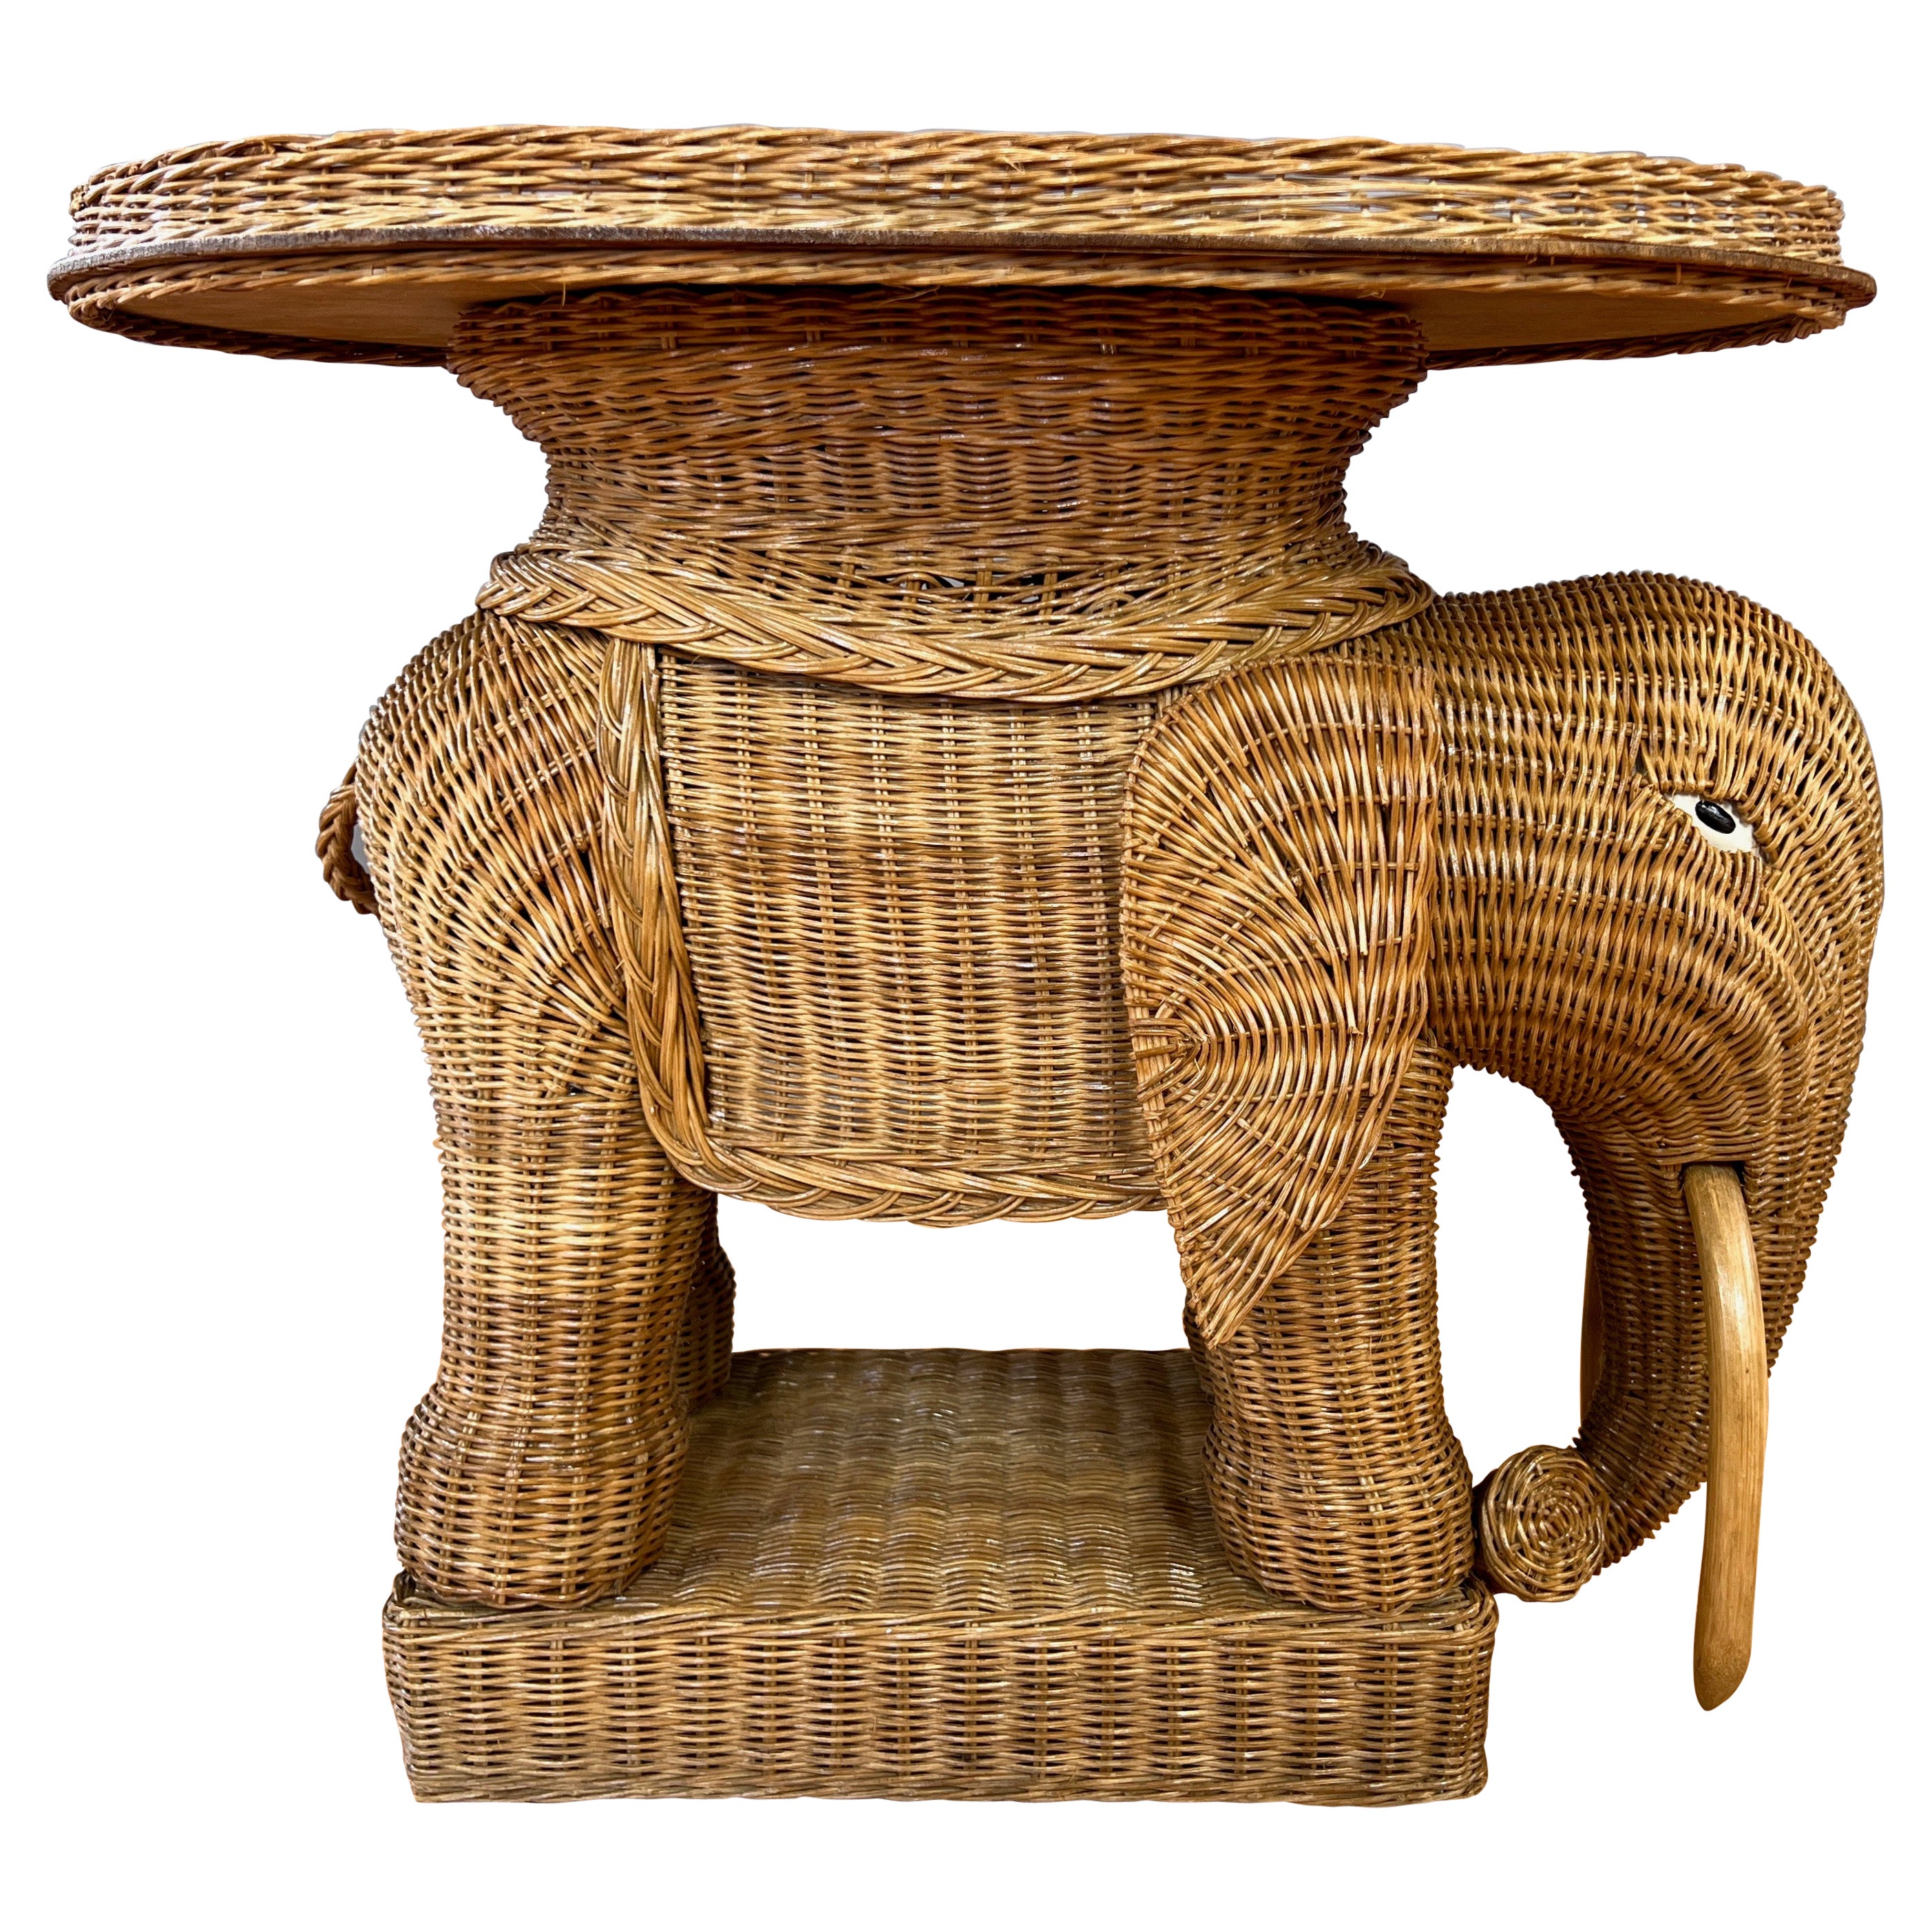 Vintage Boho Chic Natural Wicker & Rattan Elephant Side Table with Tray, 1970s For Sale